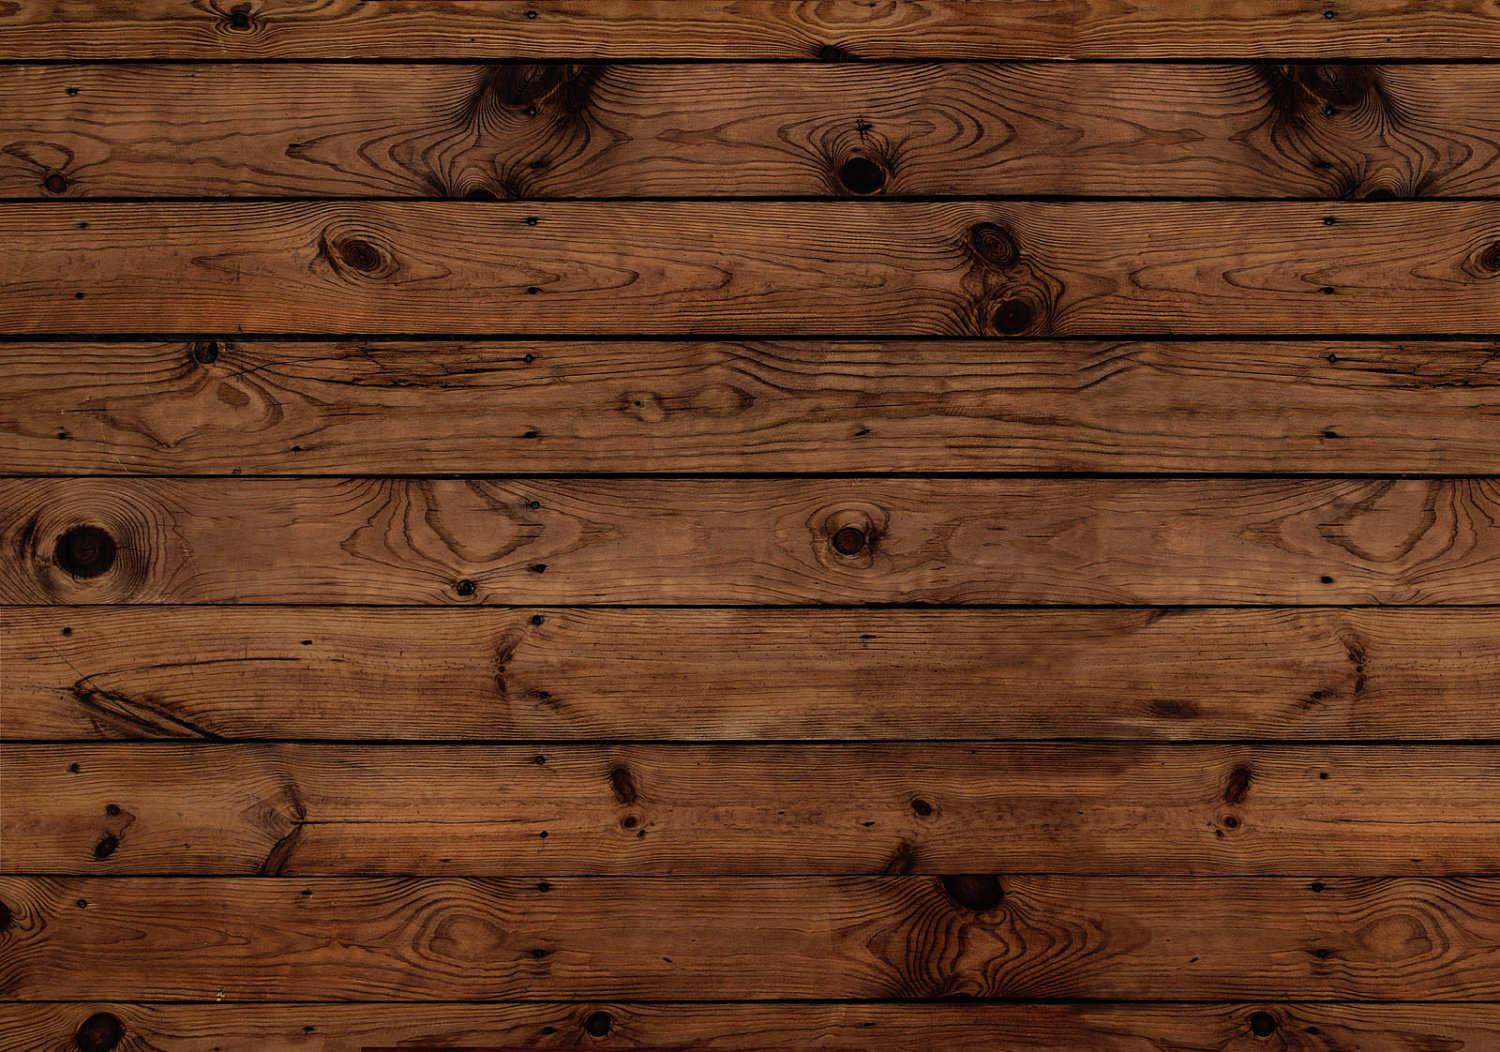 Darkwood Plank Faux Wood Rug Flooring Background Or By Funlicious